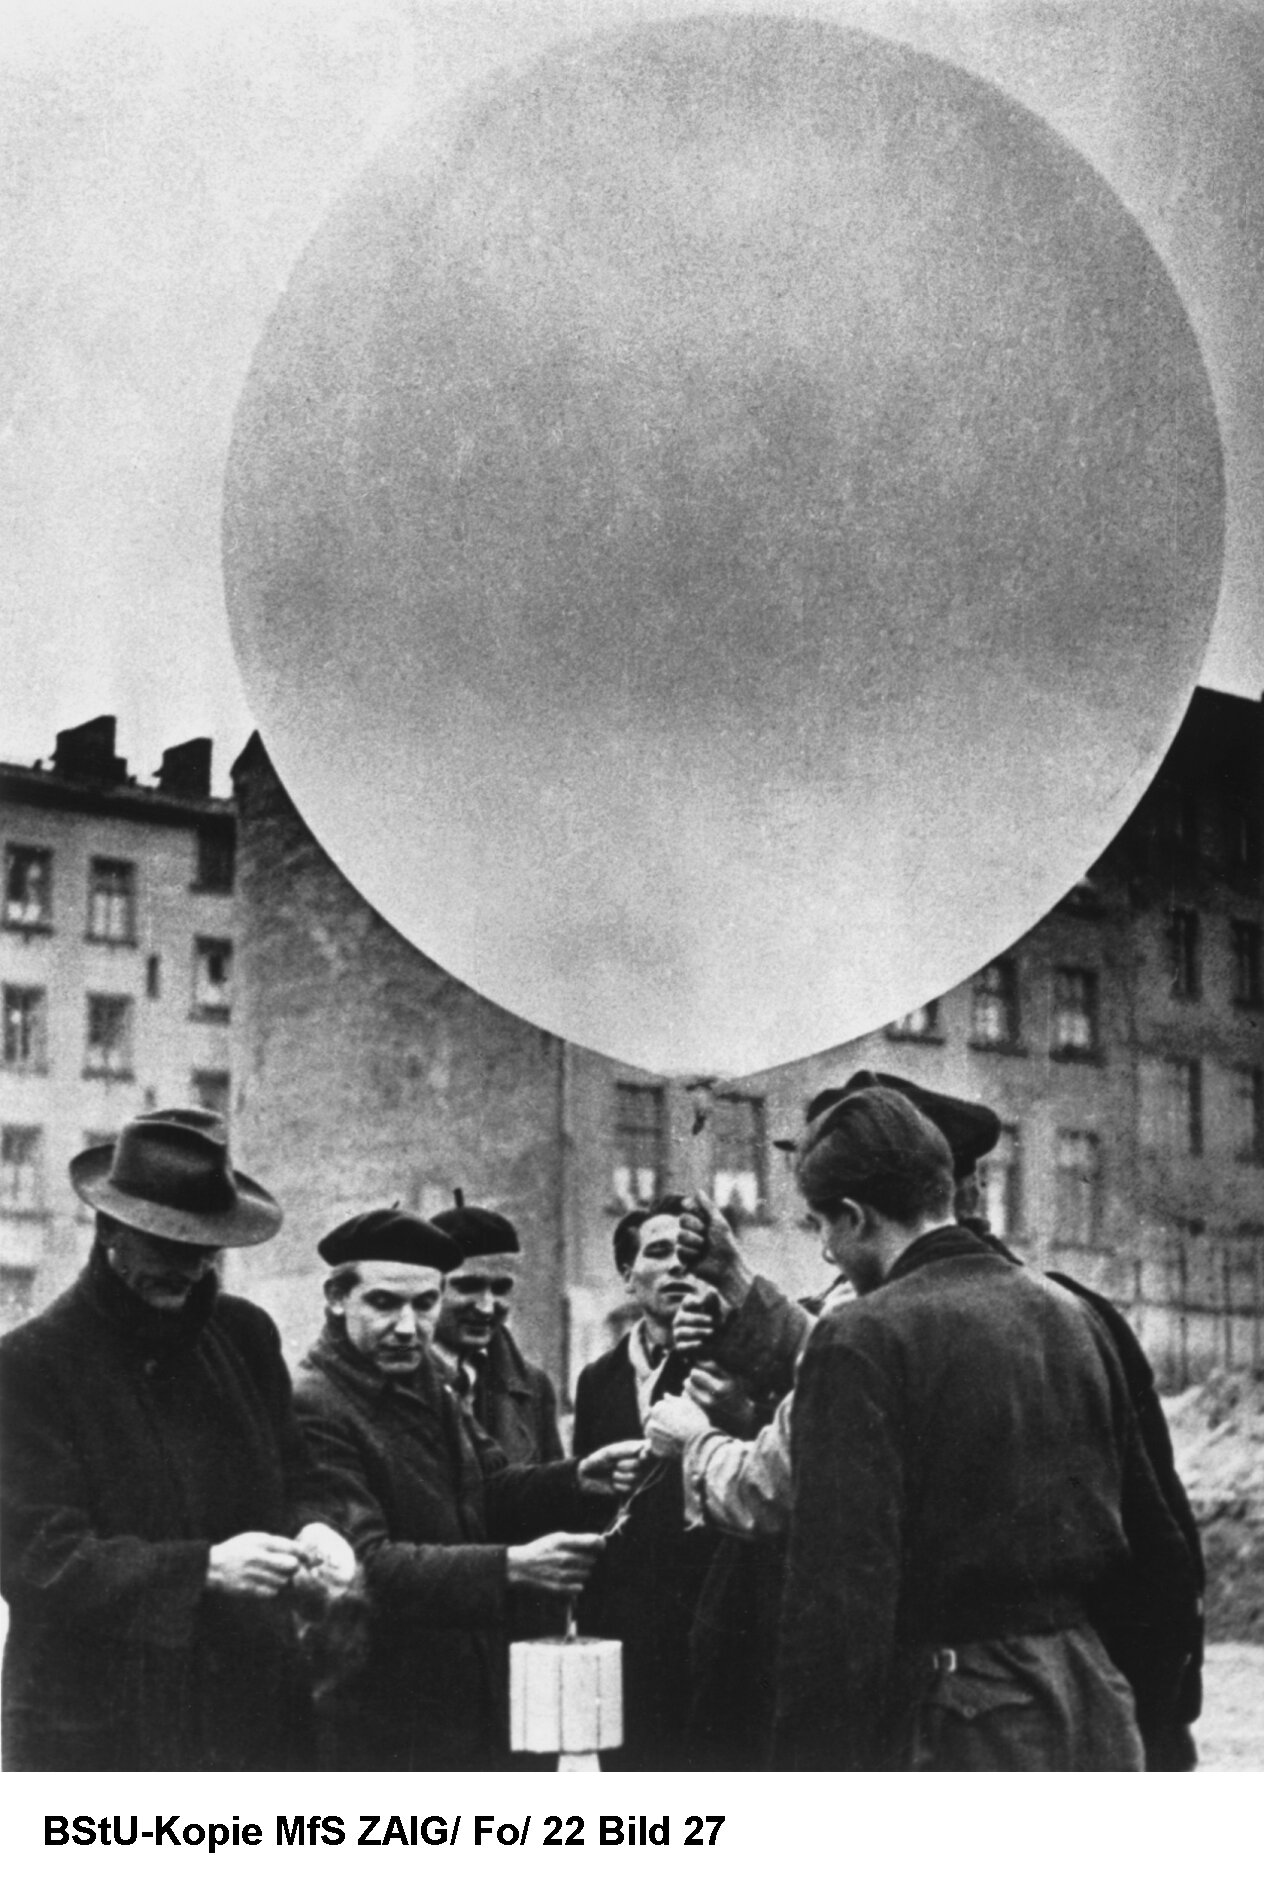 Balloons were one delivery platform used by the Kampfgruppe to post messages and leaflets into East Germany. (BStU, via Enrico Heitzer).&nbsp;Rid, Thomas. Active Measures: The Secret History of Disinformation and Political Warfare. Farrar, Straus an…